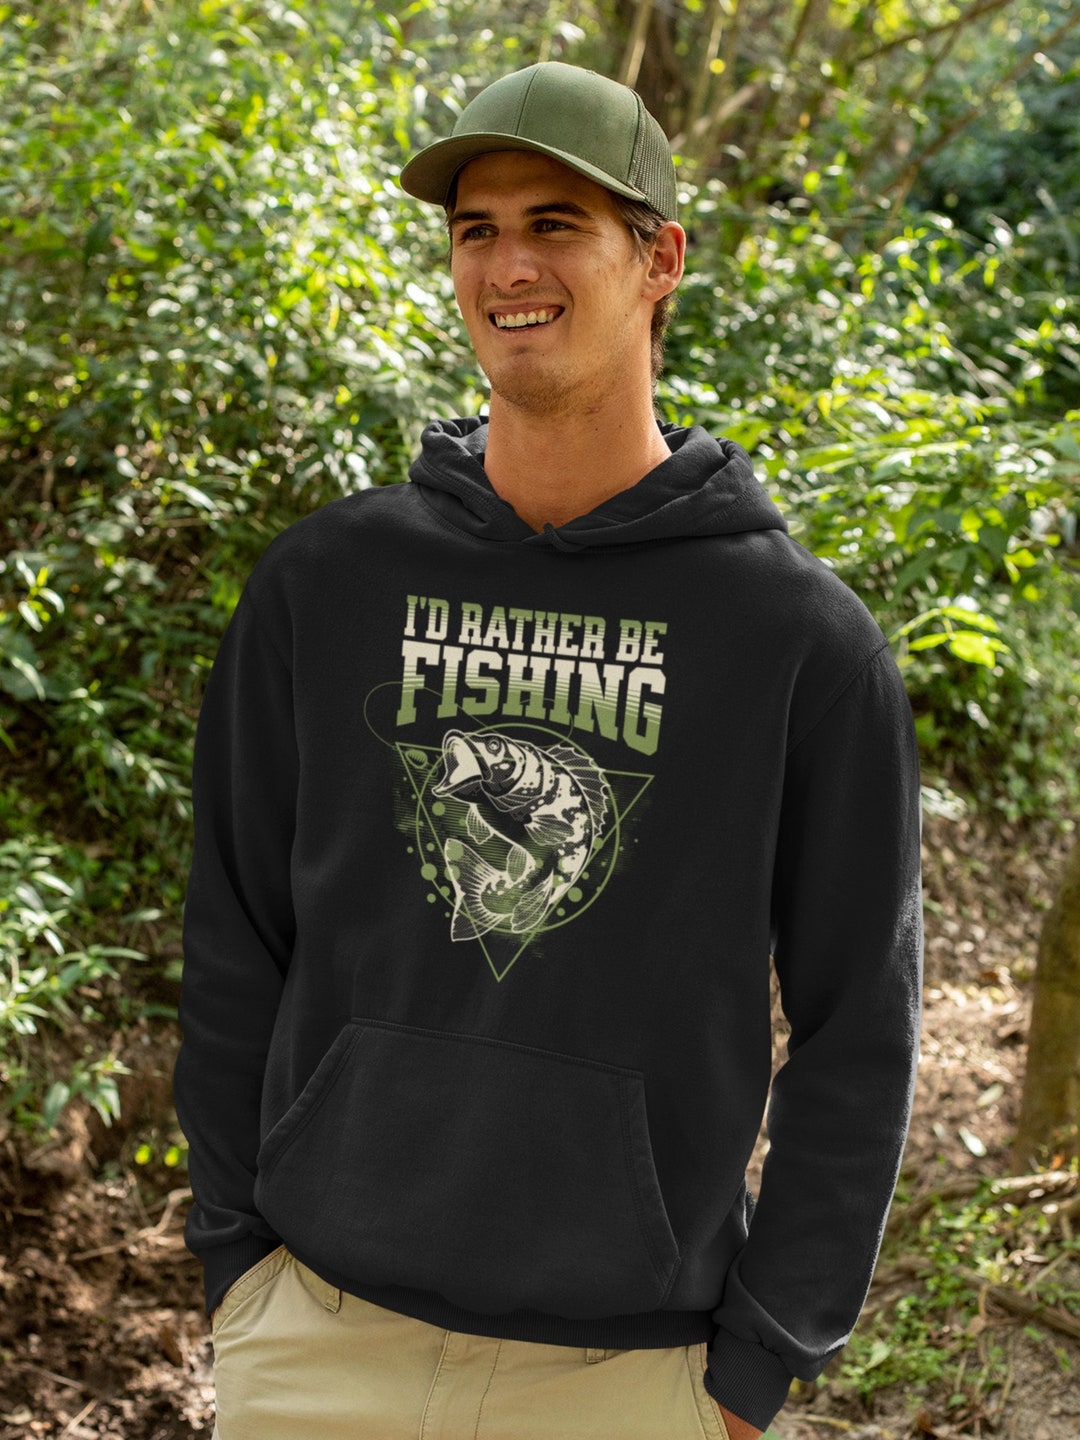 Men's Fishing Hoodiei'd Rather Be Fishing Shirtfunny Fishing  Sweatshirtfunny Fishing Giftgift for Fishermangift for Himgift for Dad 